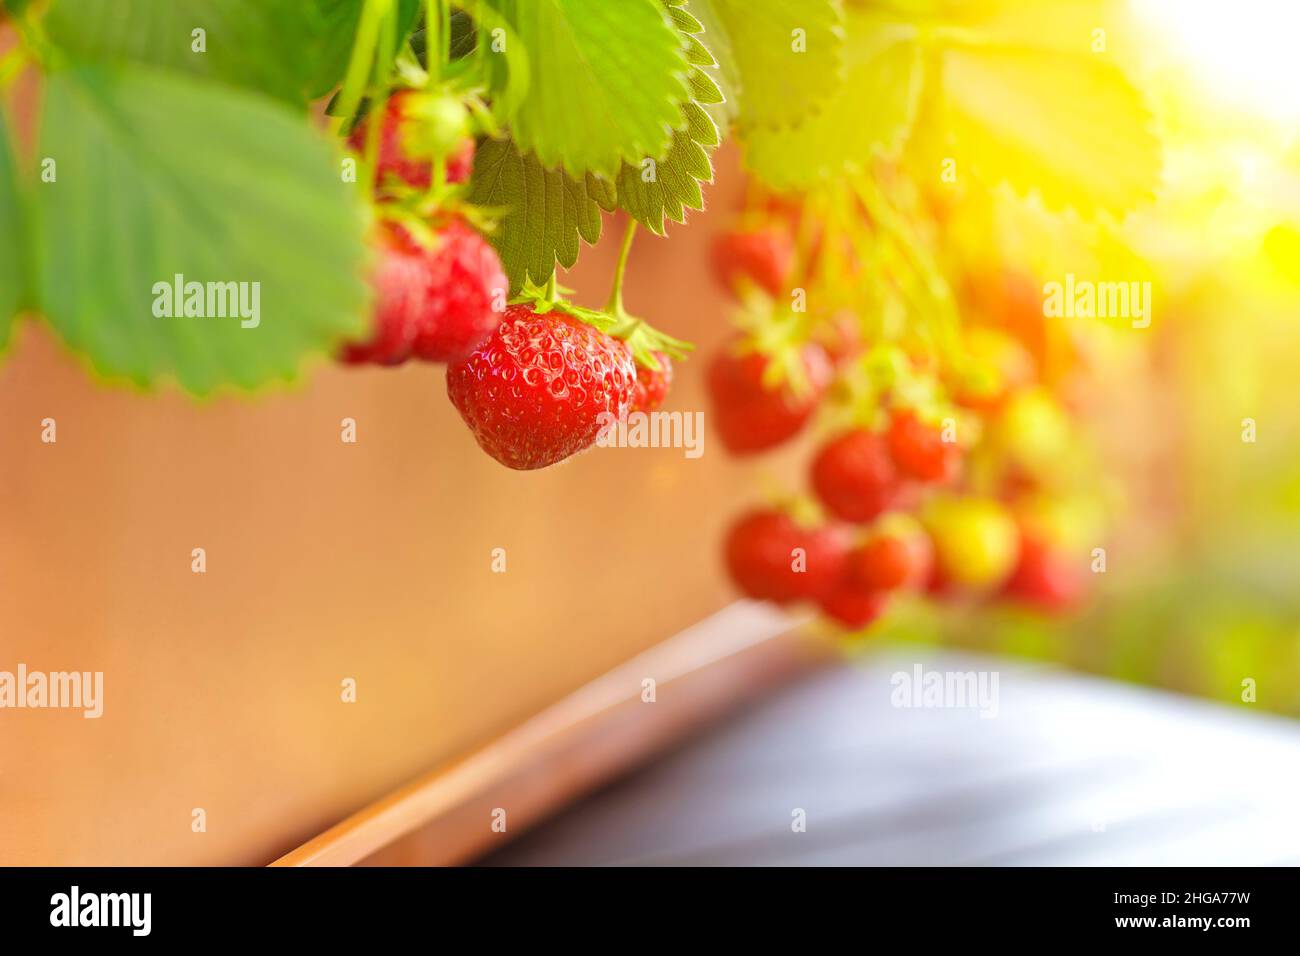 Close-up of ripe red strawberries in a balcony planter box, apartment or urban gardening concept, copy space. Stock Photo